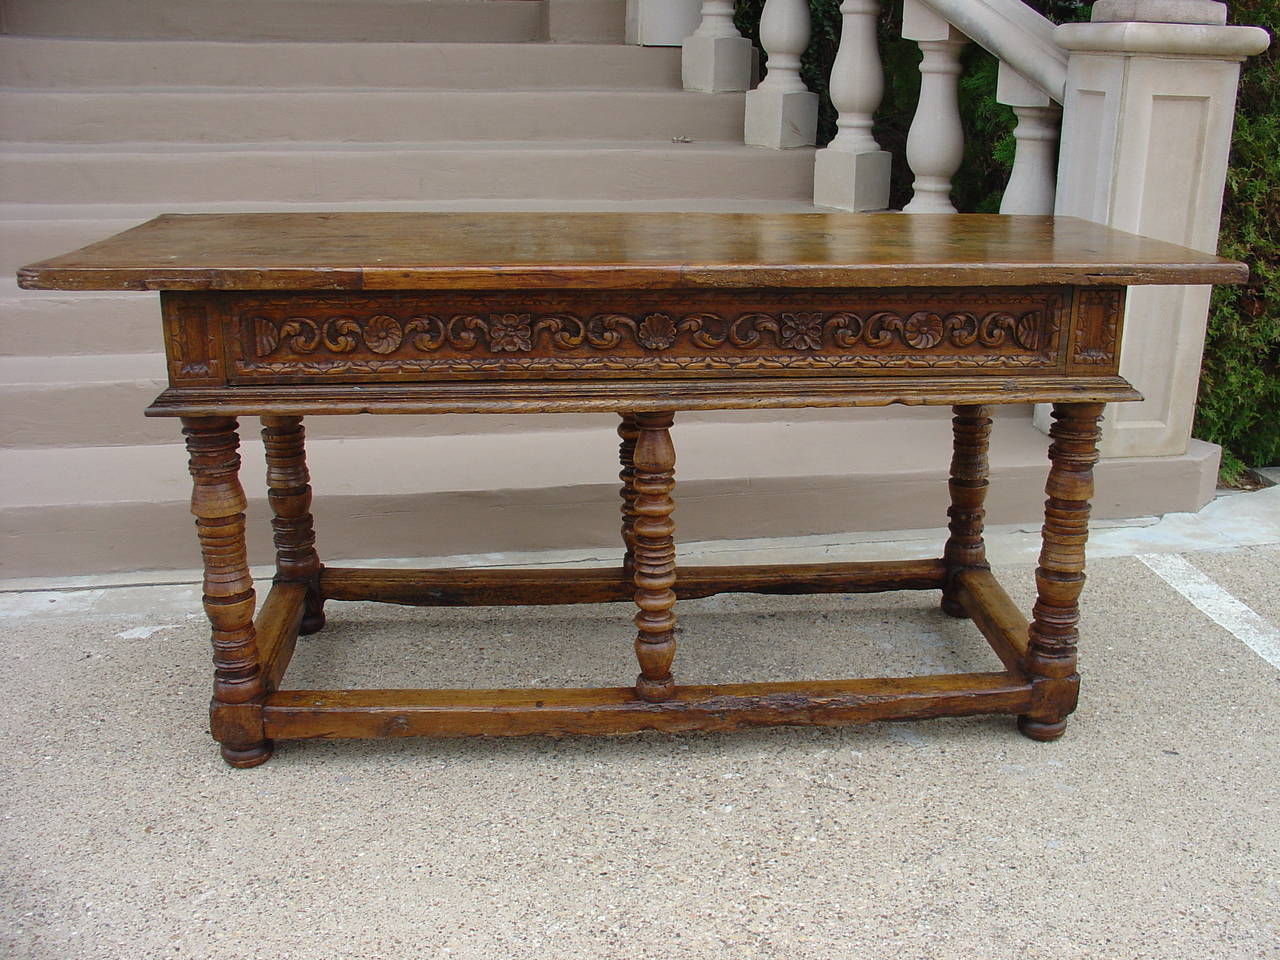 This rare and exceptional Spanish walnut wood center table/console has a single plank rectangular top with an overhang.  Beneath it is a decorated frieze on all four sides indicating it was intended to stand in the center of the room.  This was a